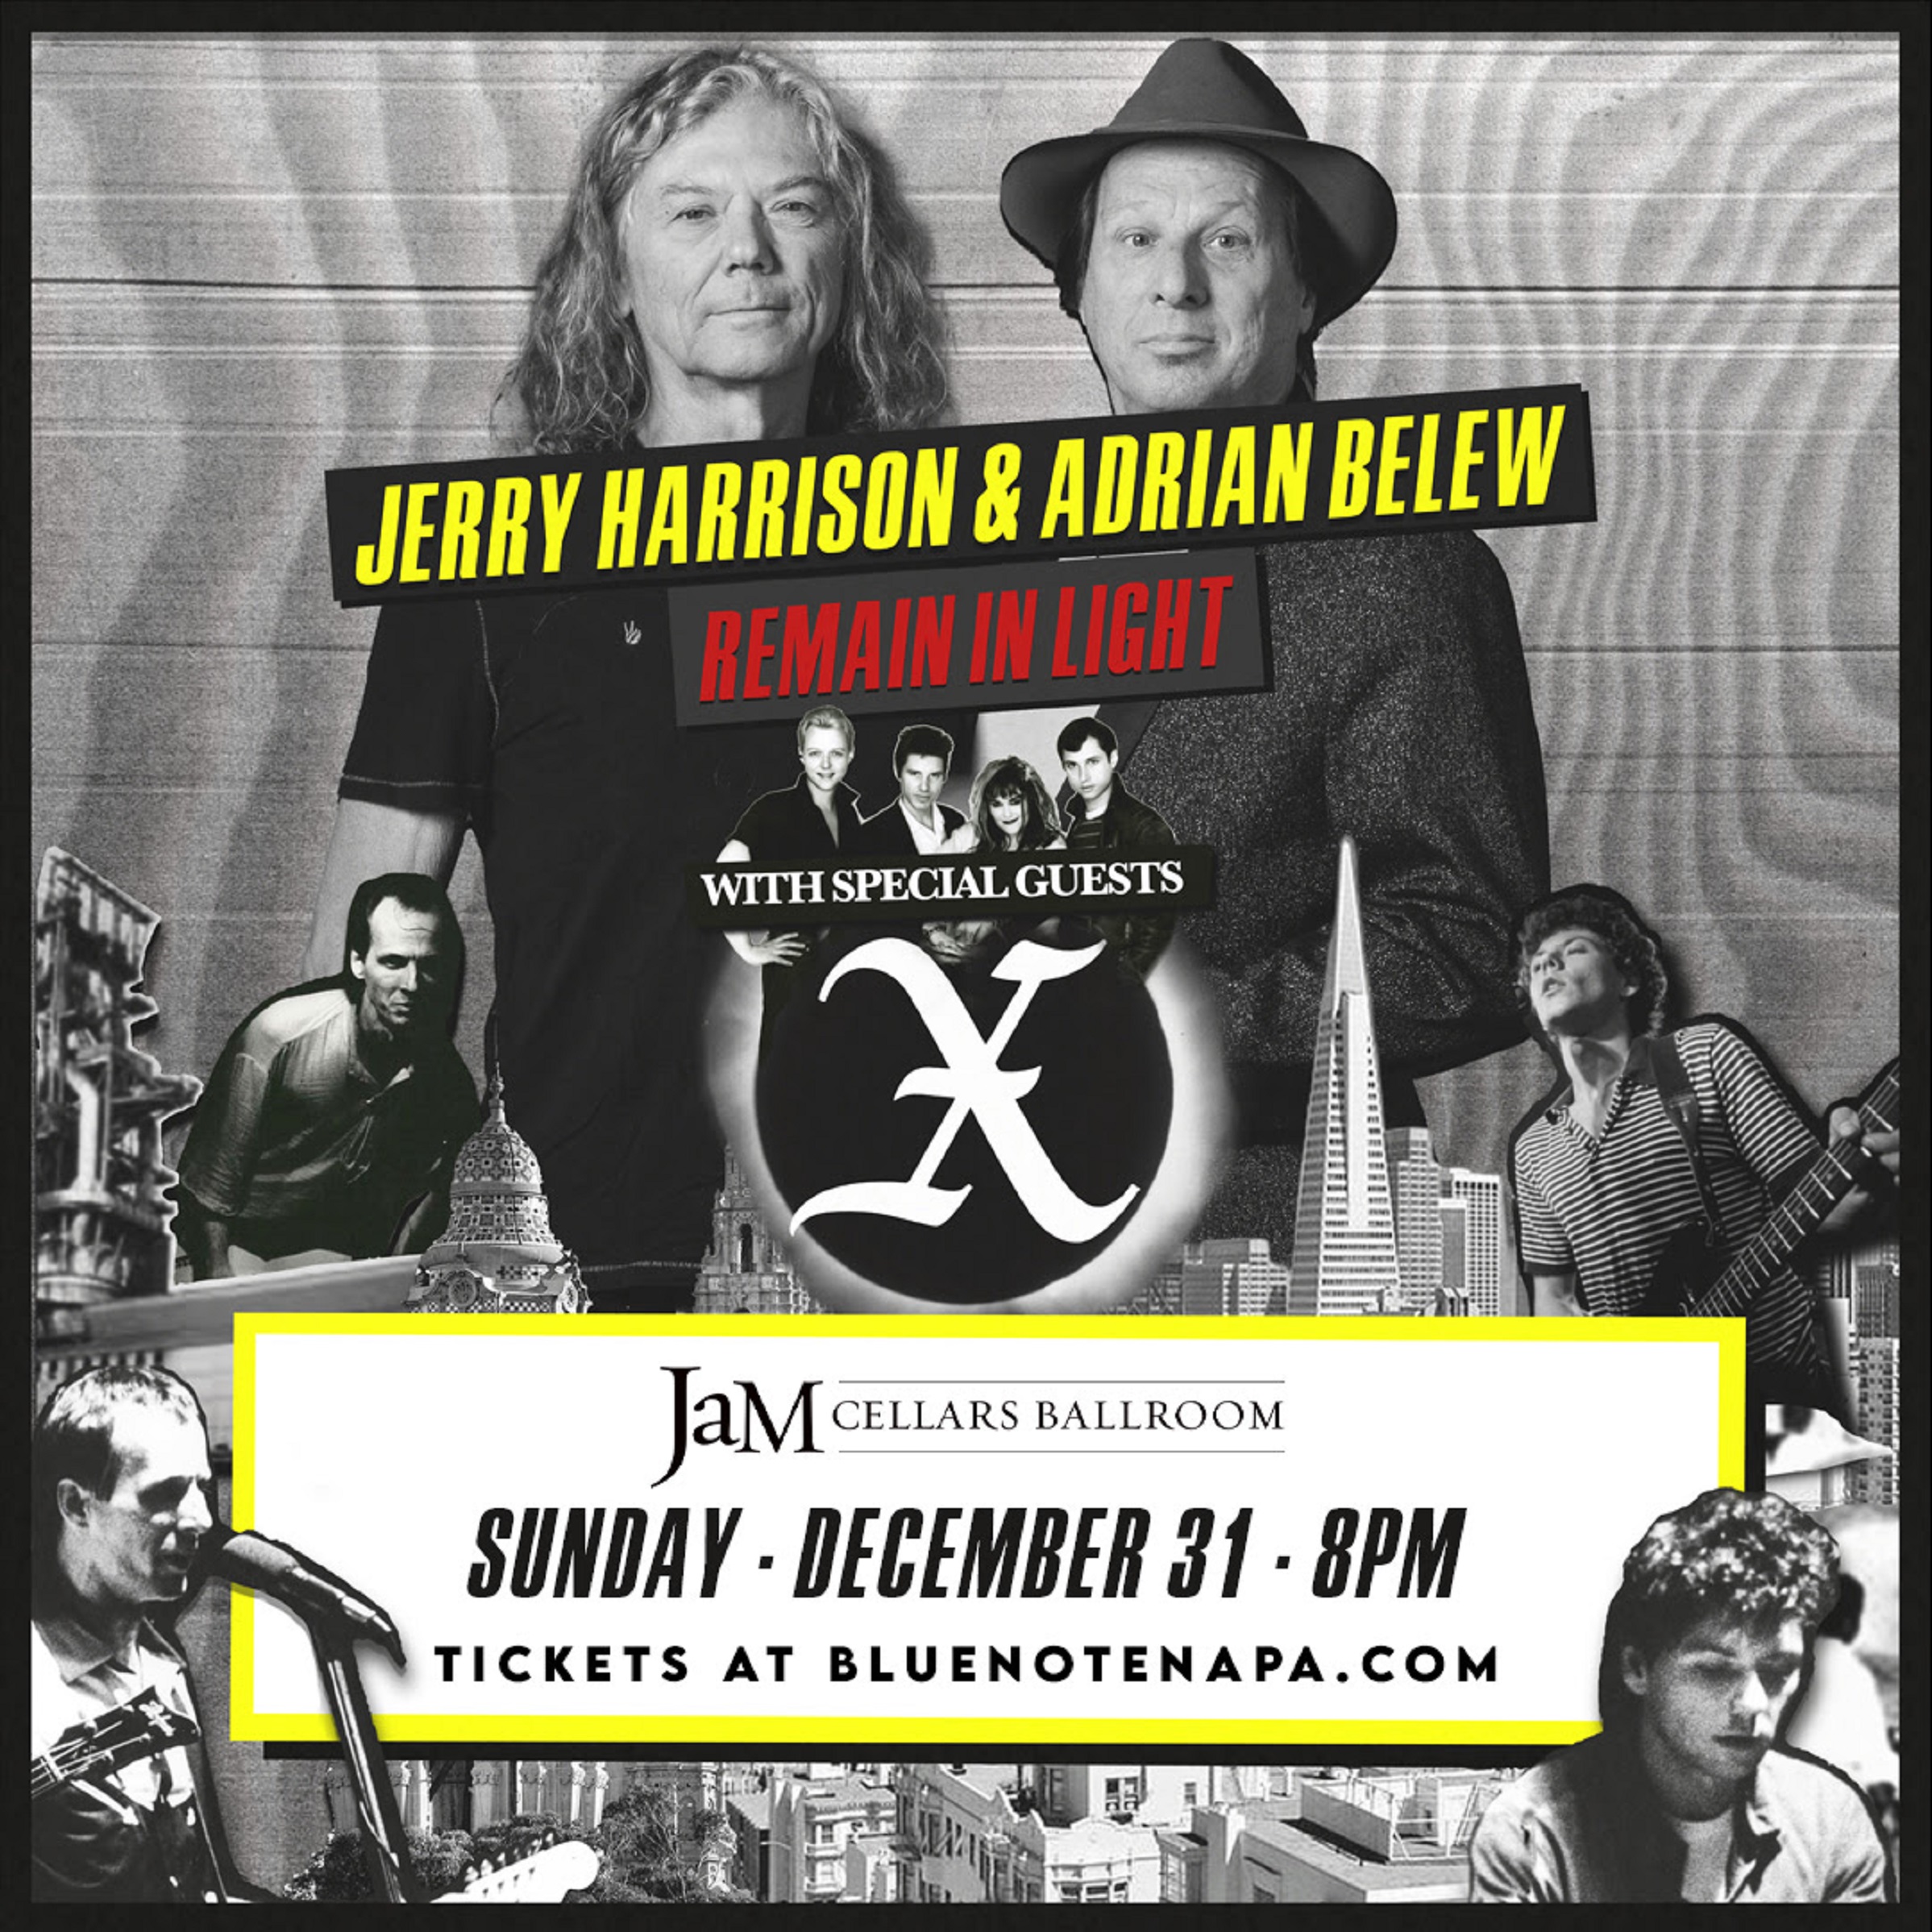 Harrison & Adrian Belew: REMAIN IN LIGHT- New Year's Eve